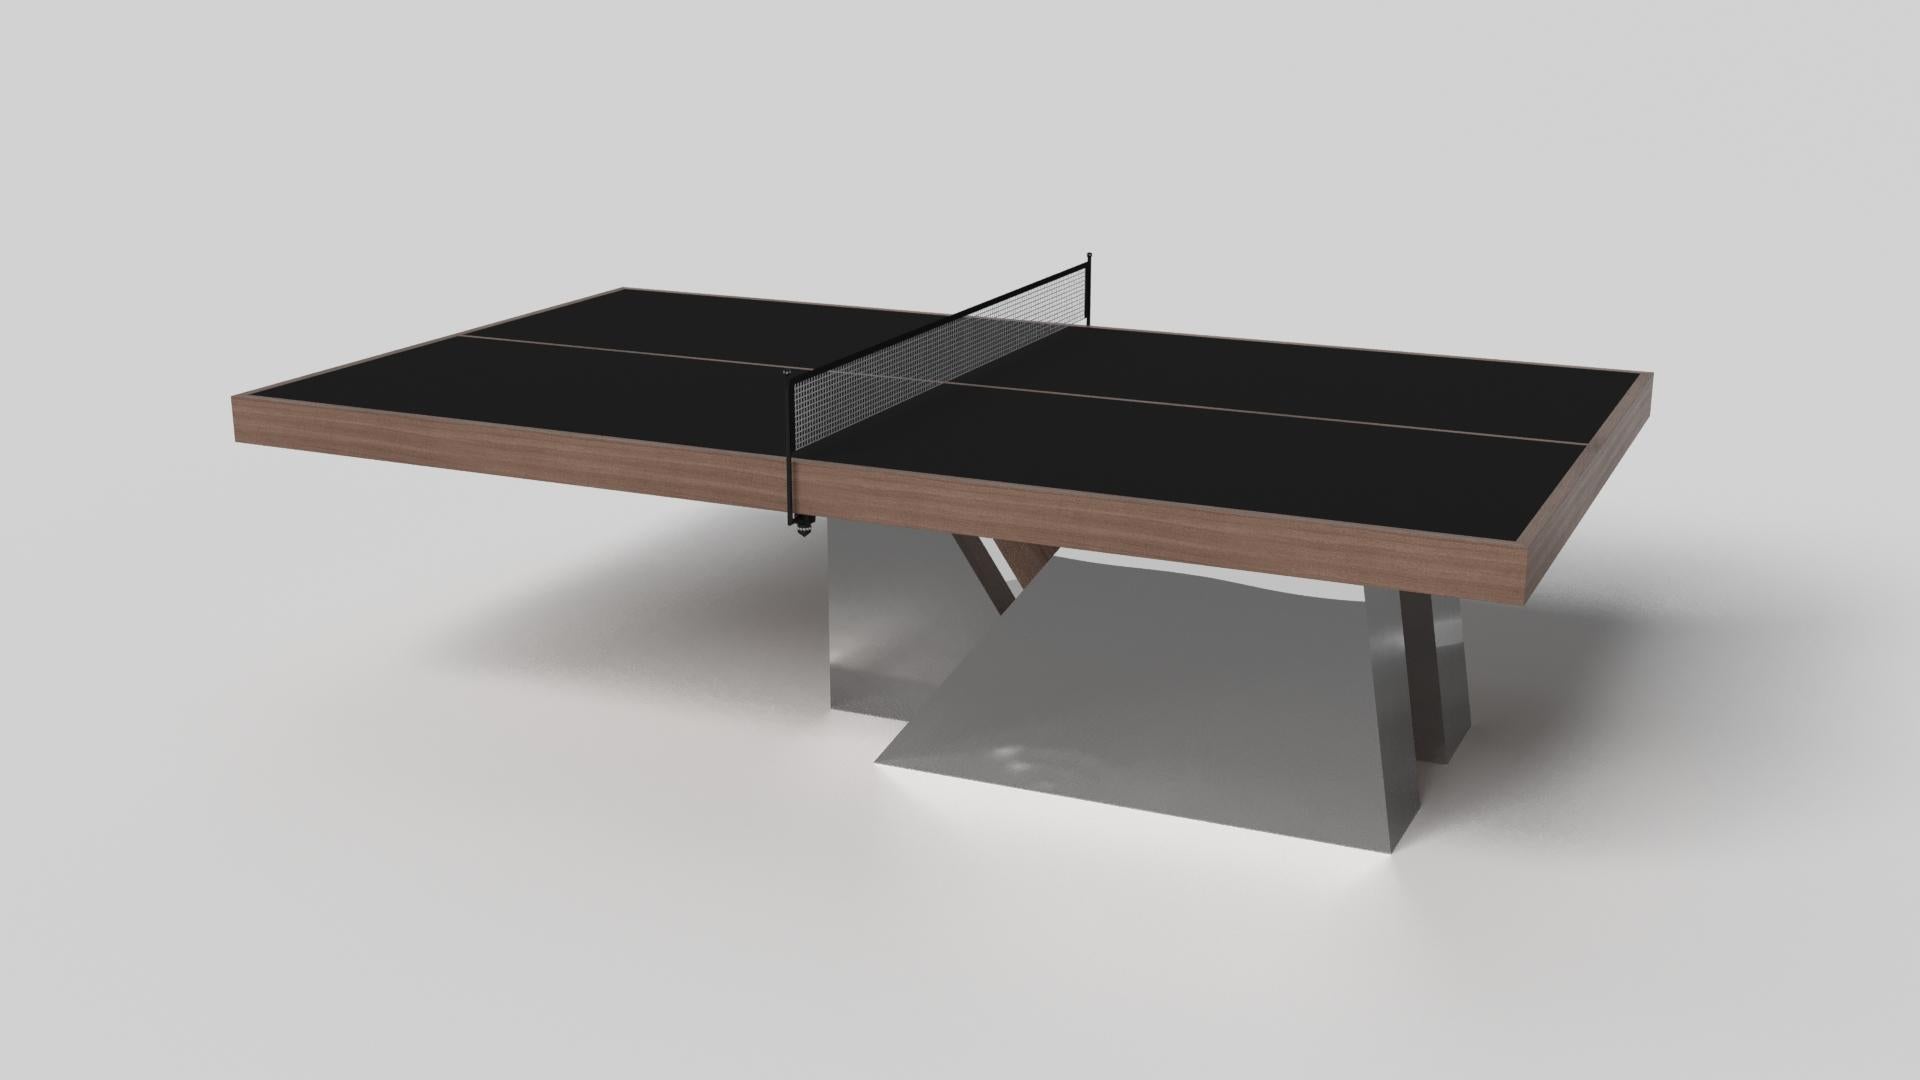 An asymmetric base creates a free-floating silhouette, making the Stilt table tennis table in chrome with walnut a compelling, contemporary addition to the modern home. Crafted from durable metal with walnut wood accents, this luxury handcrafted